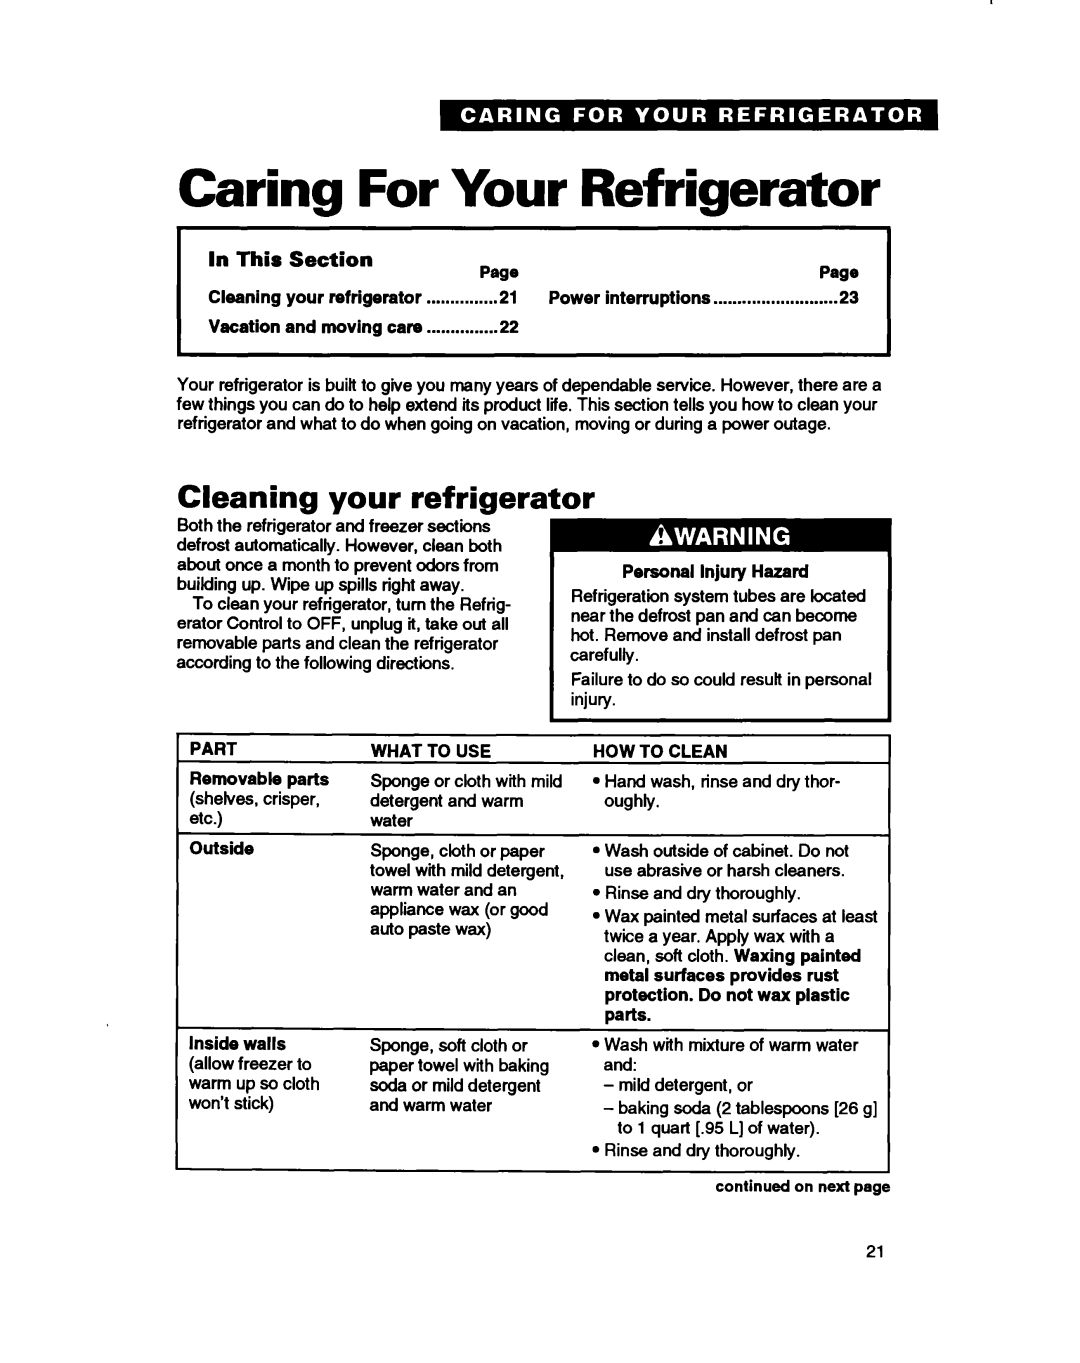 Whirlpool ED22DC Caring For Your Refrigerator, Cleaning your refrigerator, Vacation, Removable parts, Outside Inside walls 